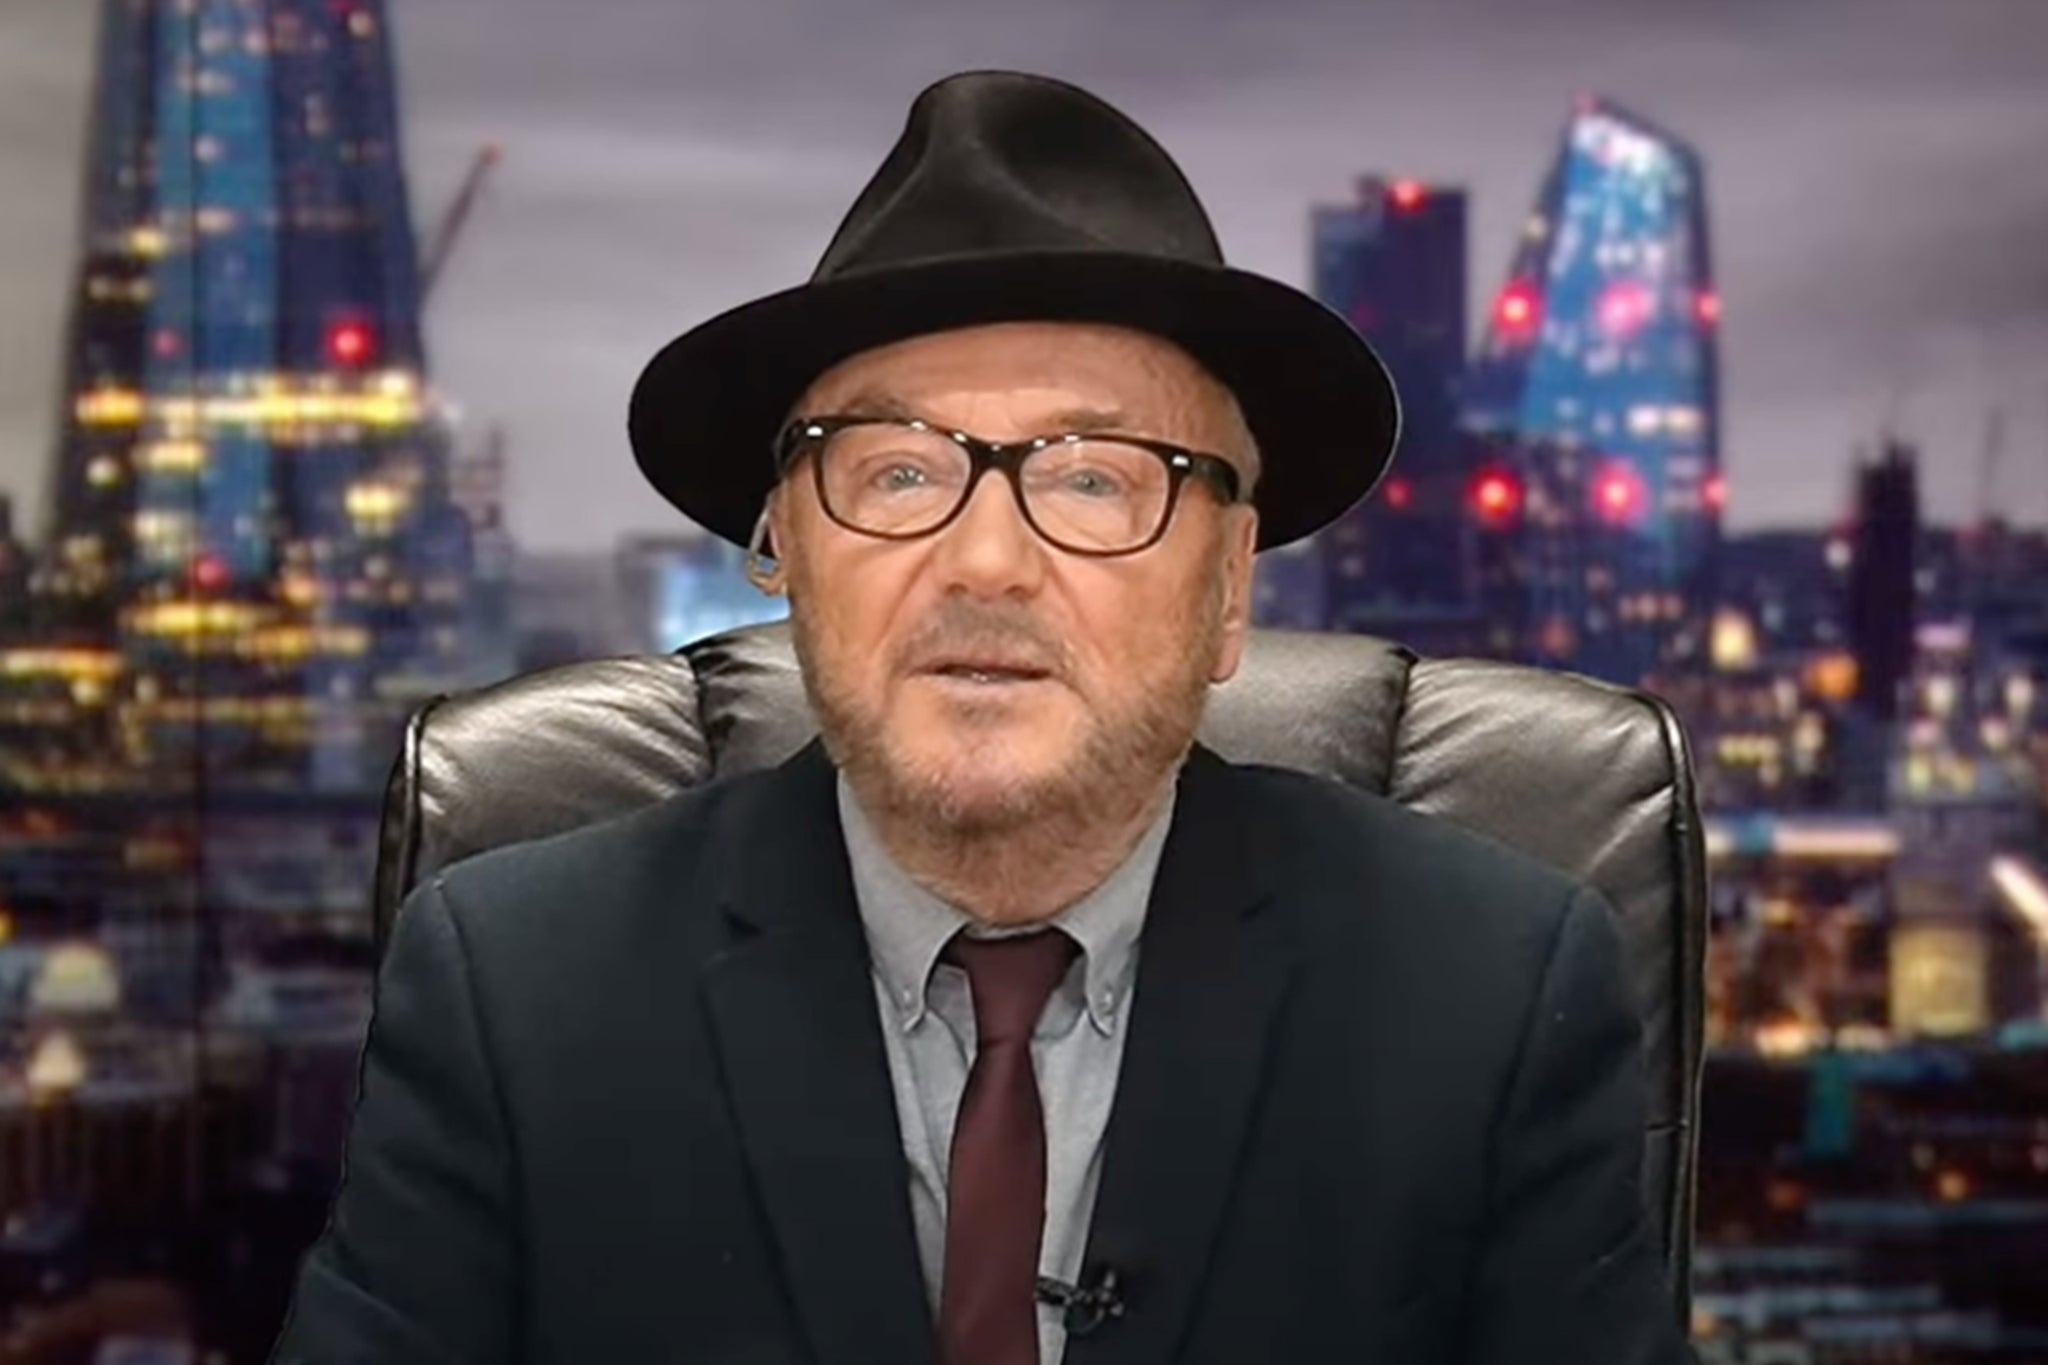 Galloway made incendiary claims in a Russian newspaper and on his YouTube talk show